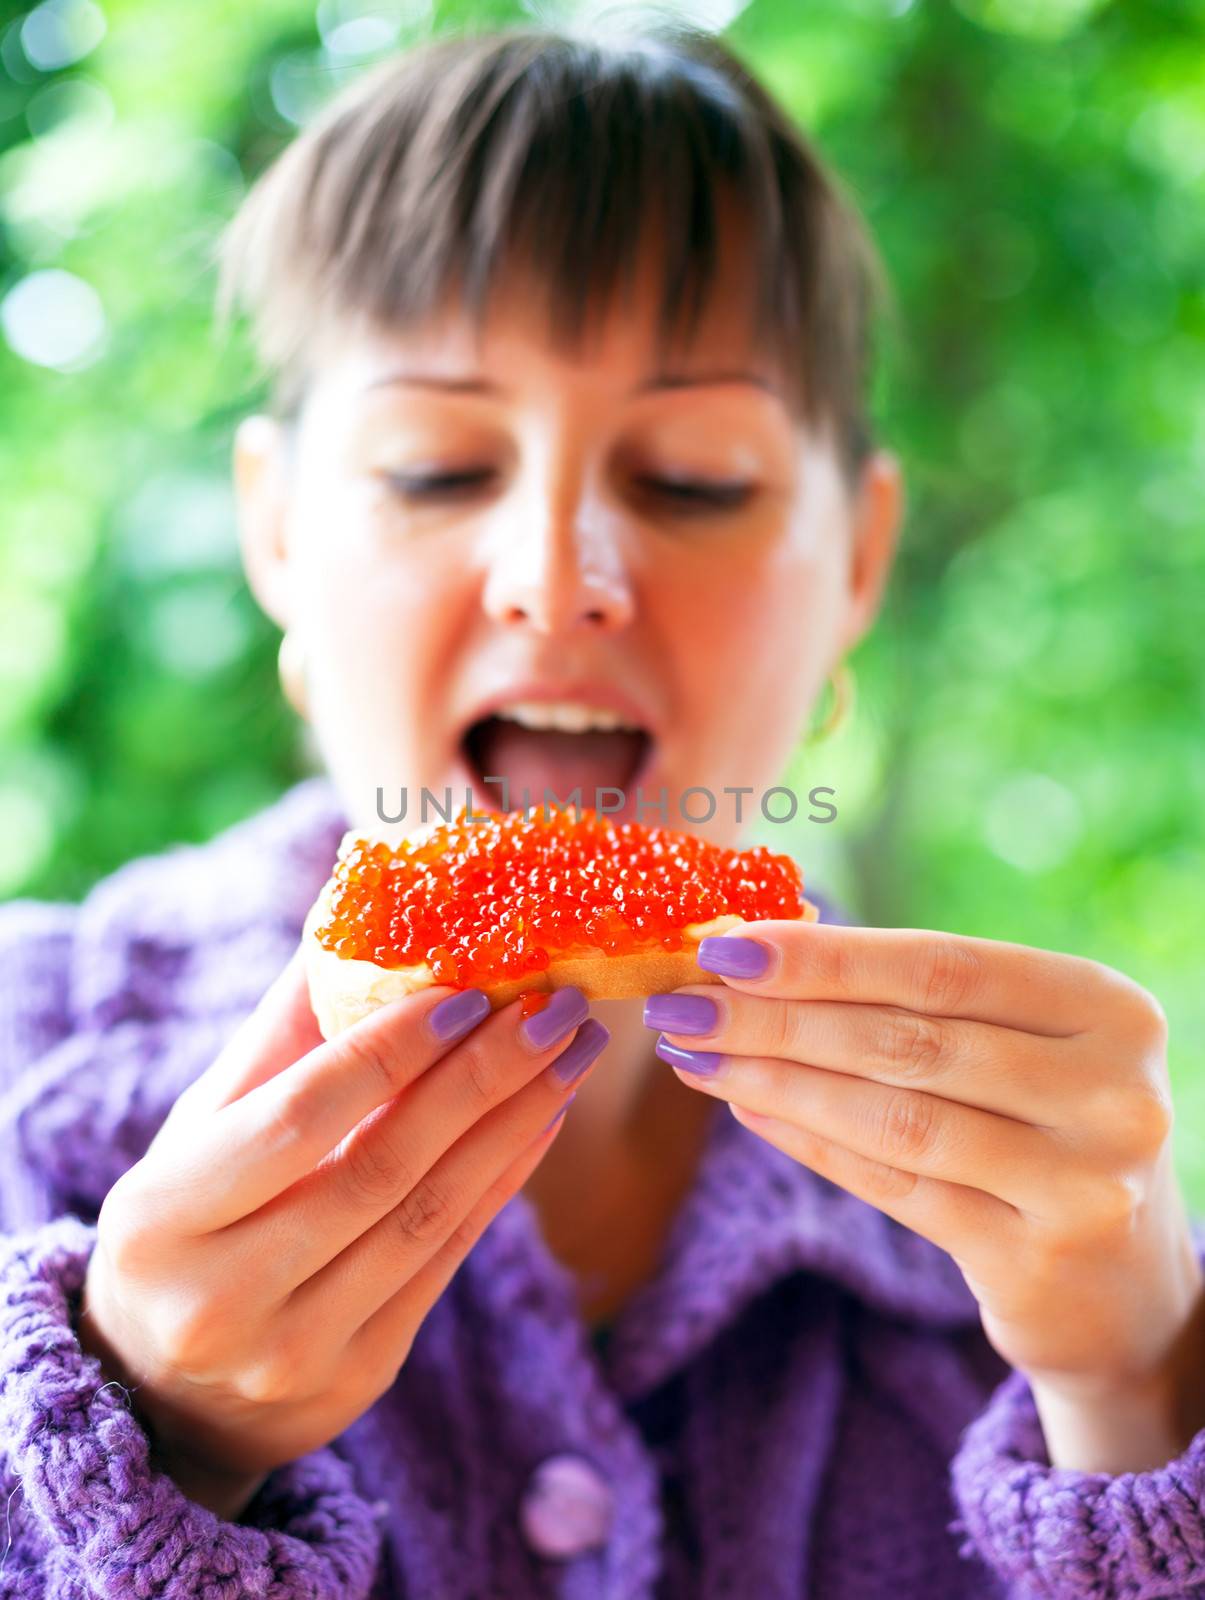  Woman eating the sandwich with red caviar  by vladimir_sklyarov